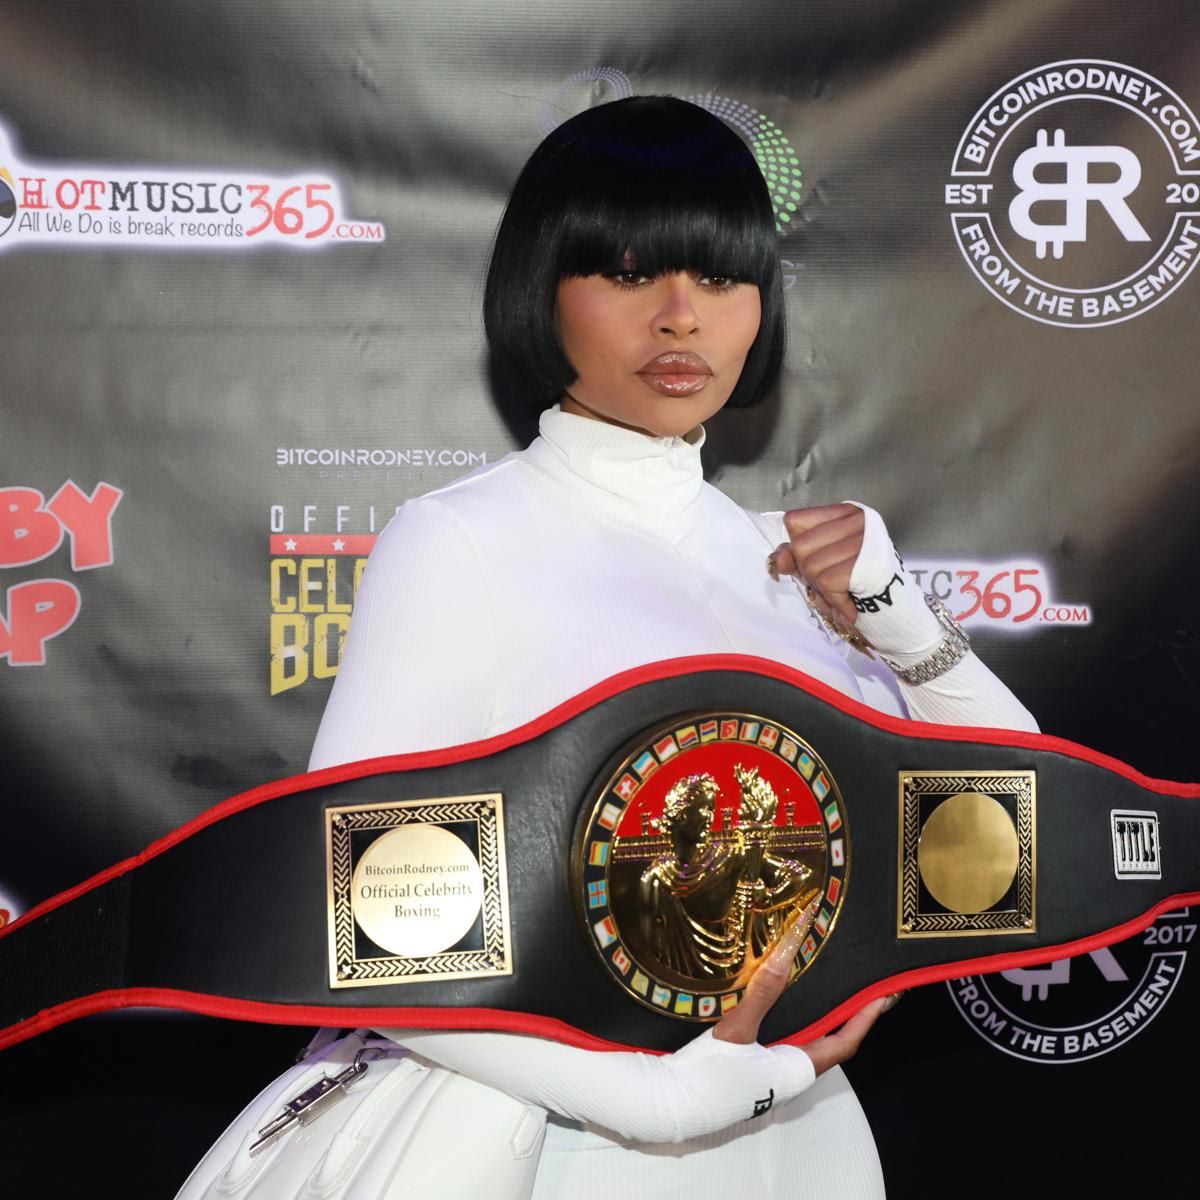 Official Celebrity Boxing South Florida Rumble Featuring Blac Chyna   Press Conference